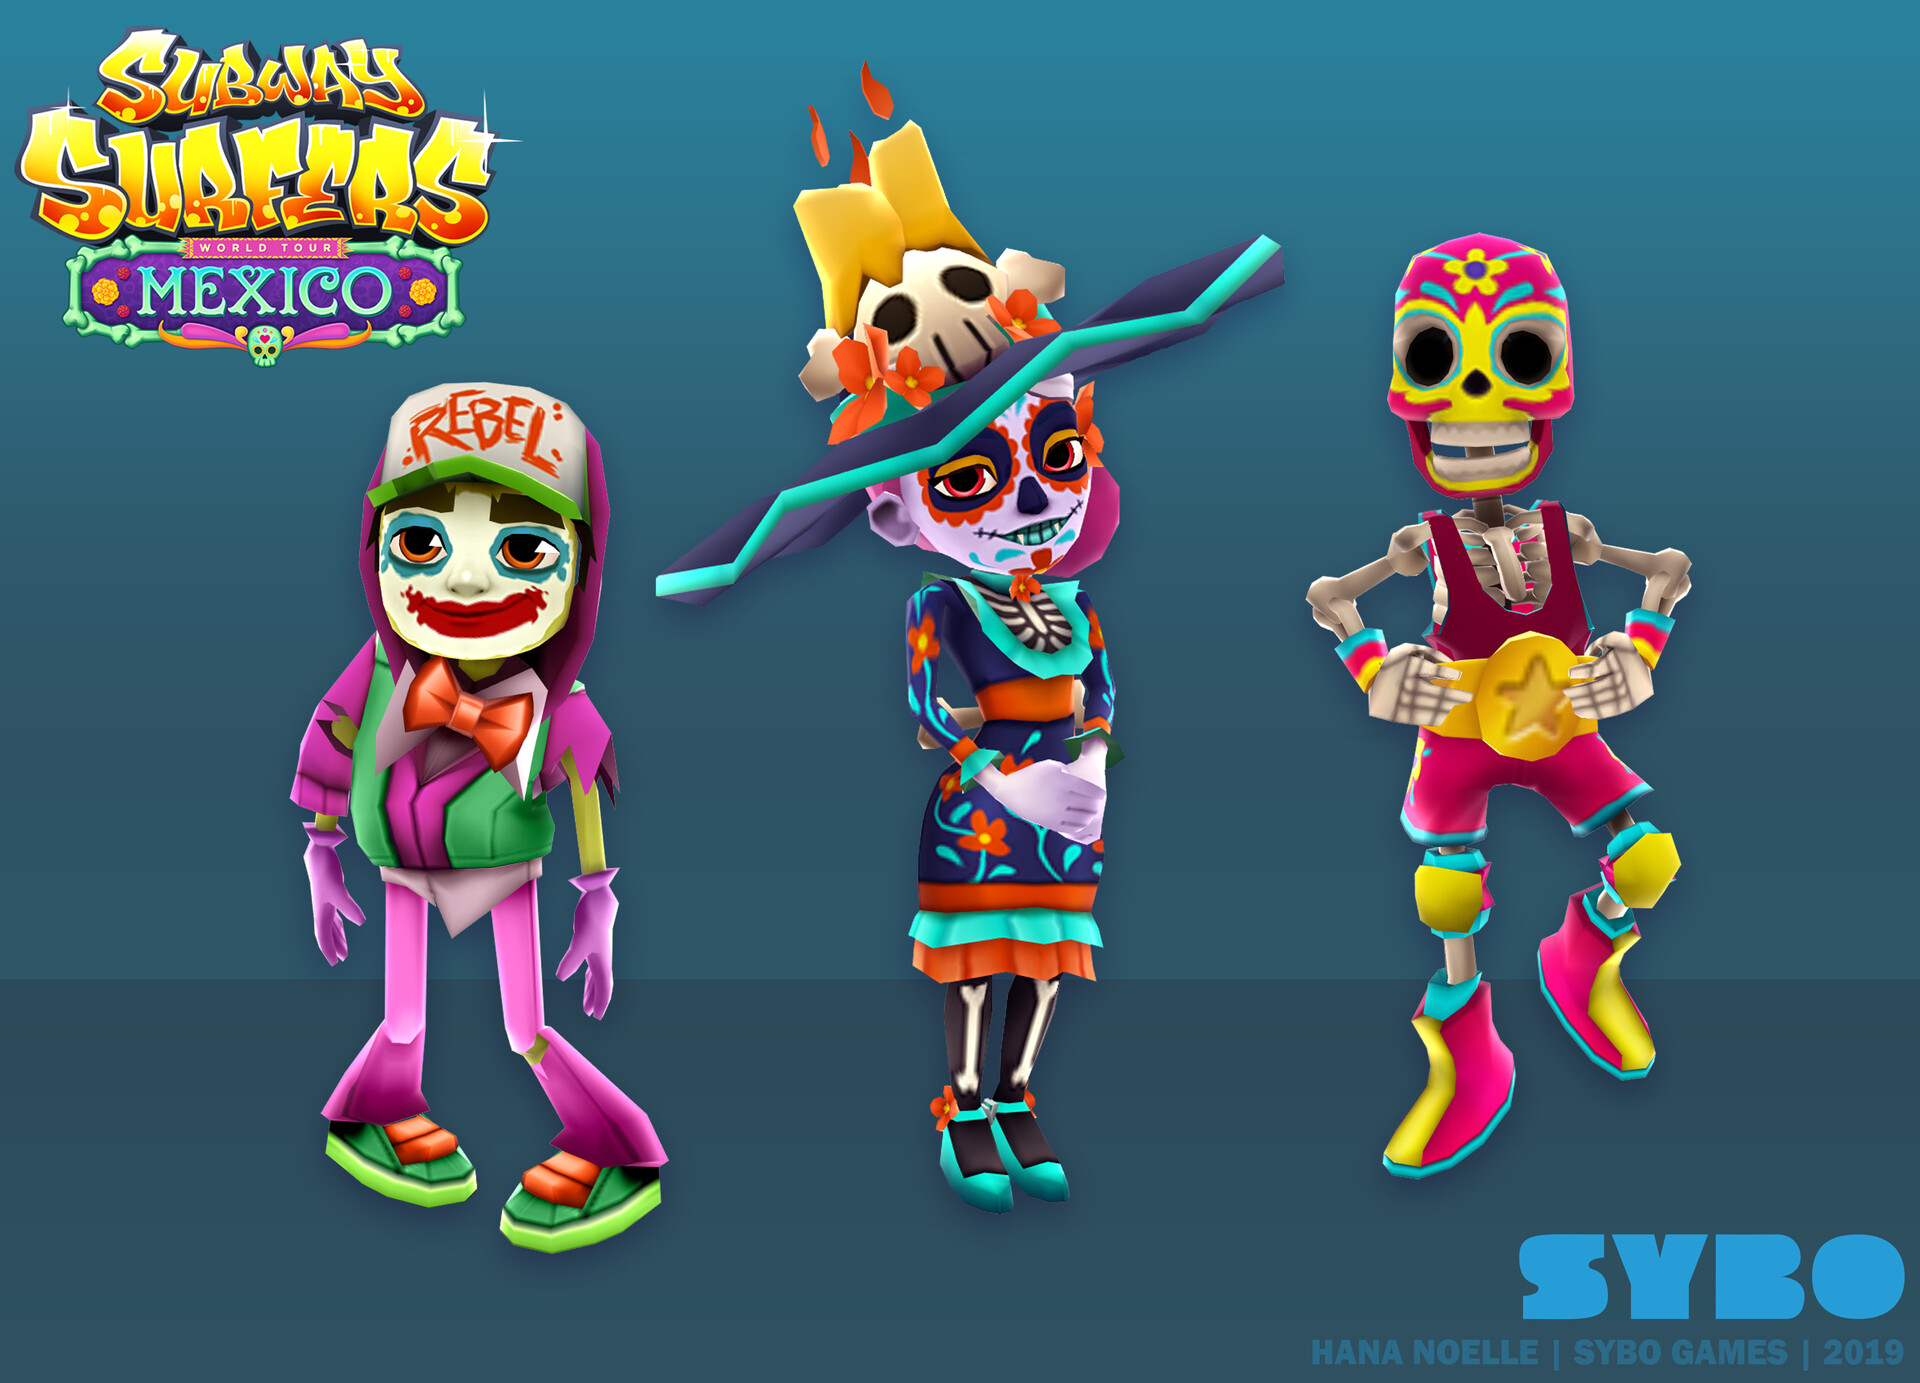 Subway Surfers World Tour 2019 - Mexico (Official Trailer) 